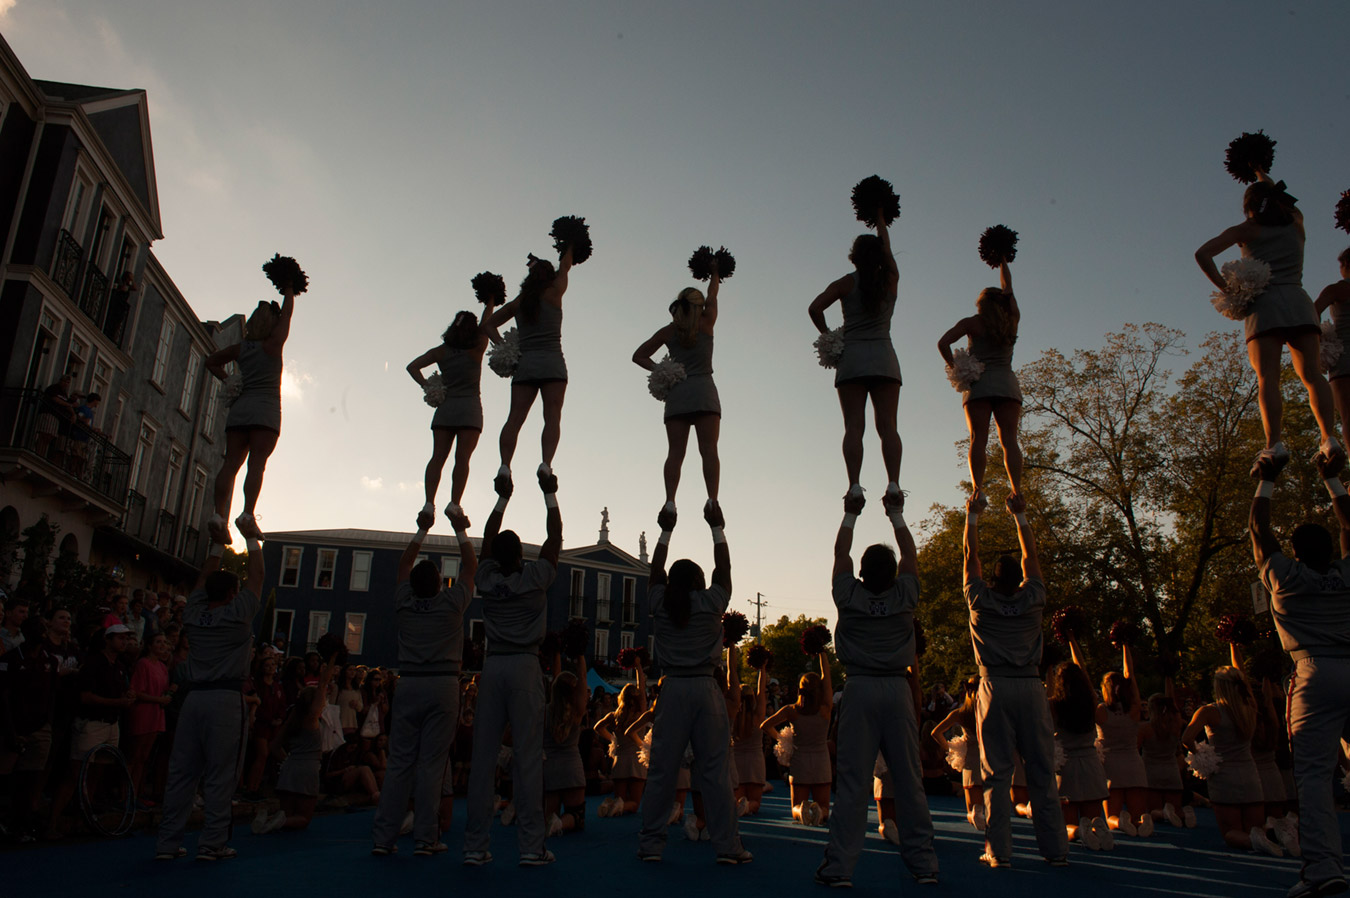 MSU cheerleaders perform during a pre-game pep rally in Starkville’s Cotton District. (Photo by Megan Bean)